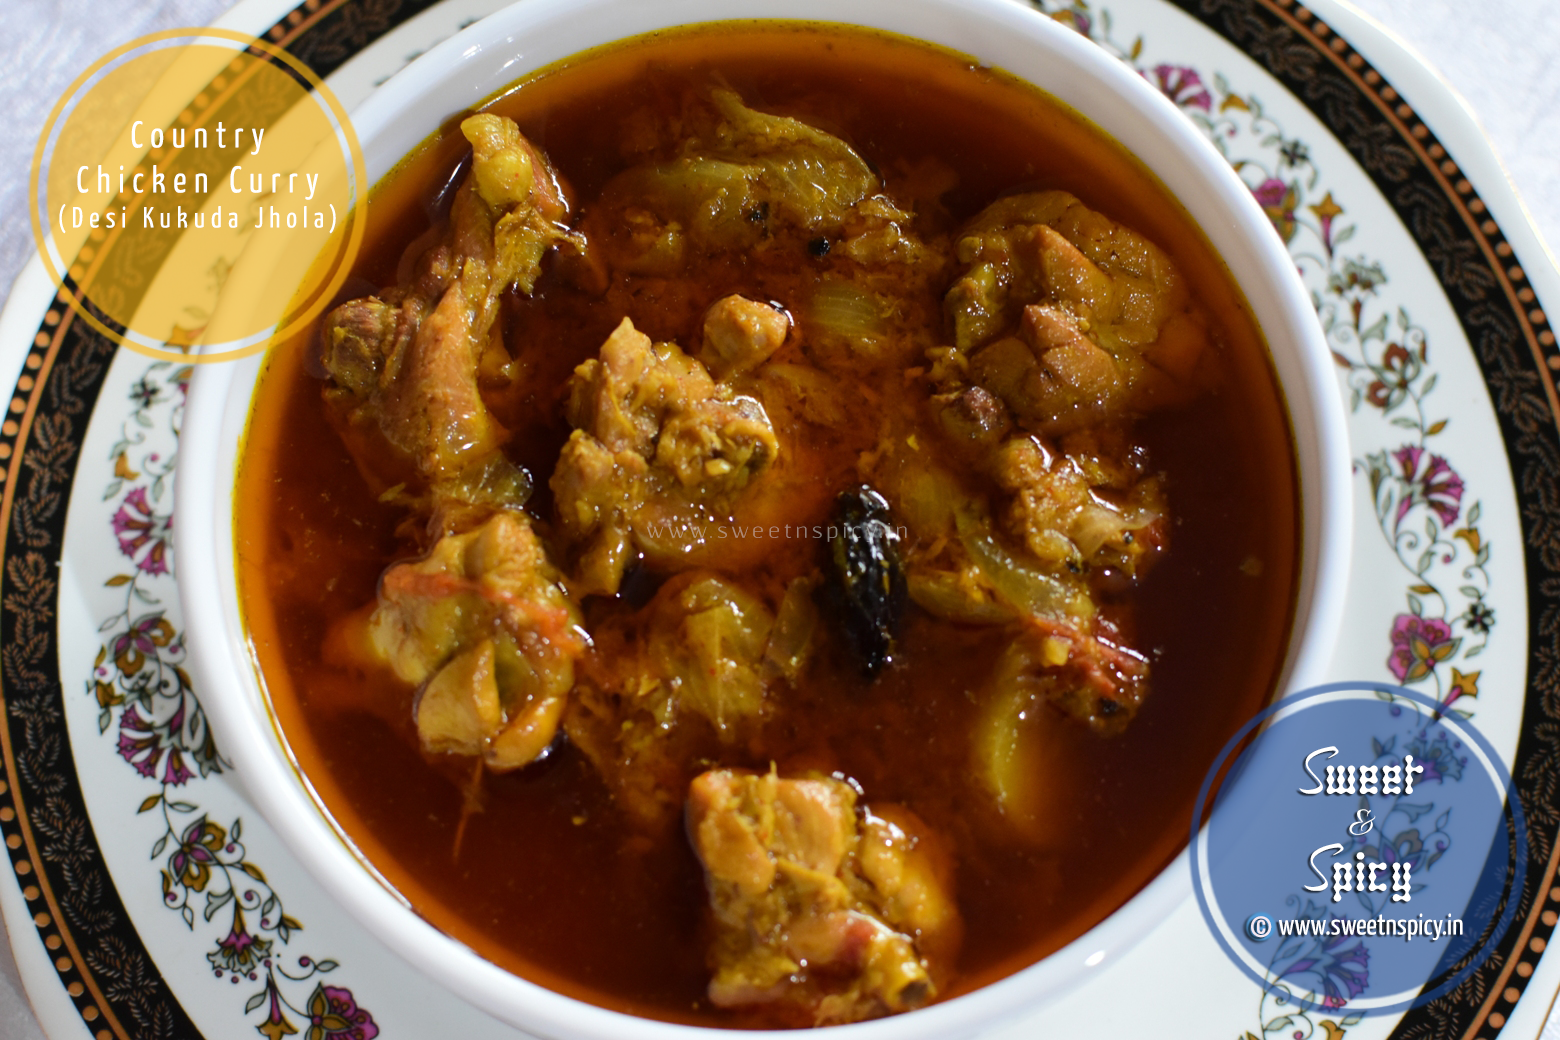 Country Chicken Curry (Desi Kukuda Jhola)